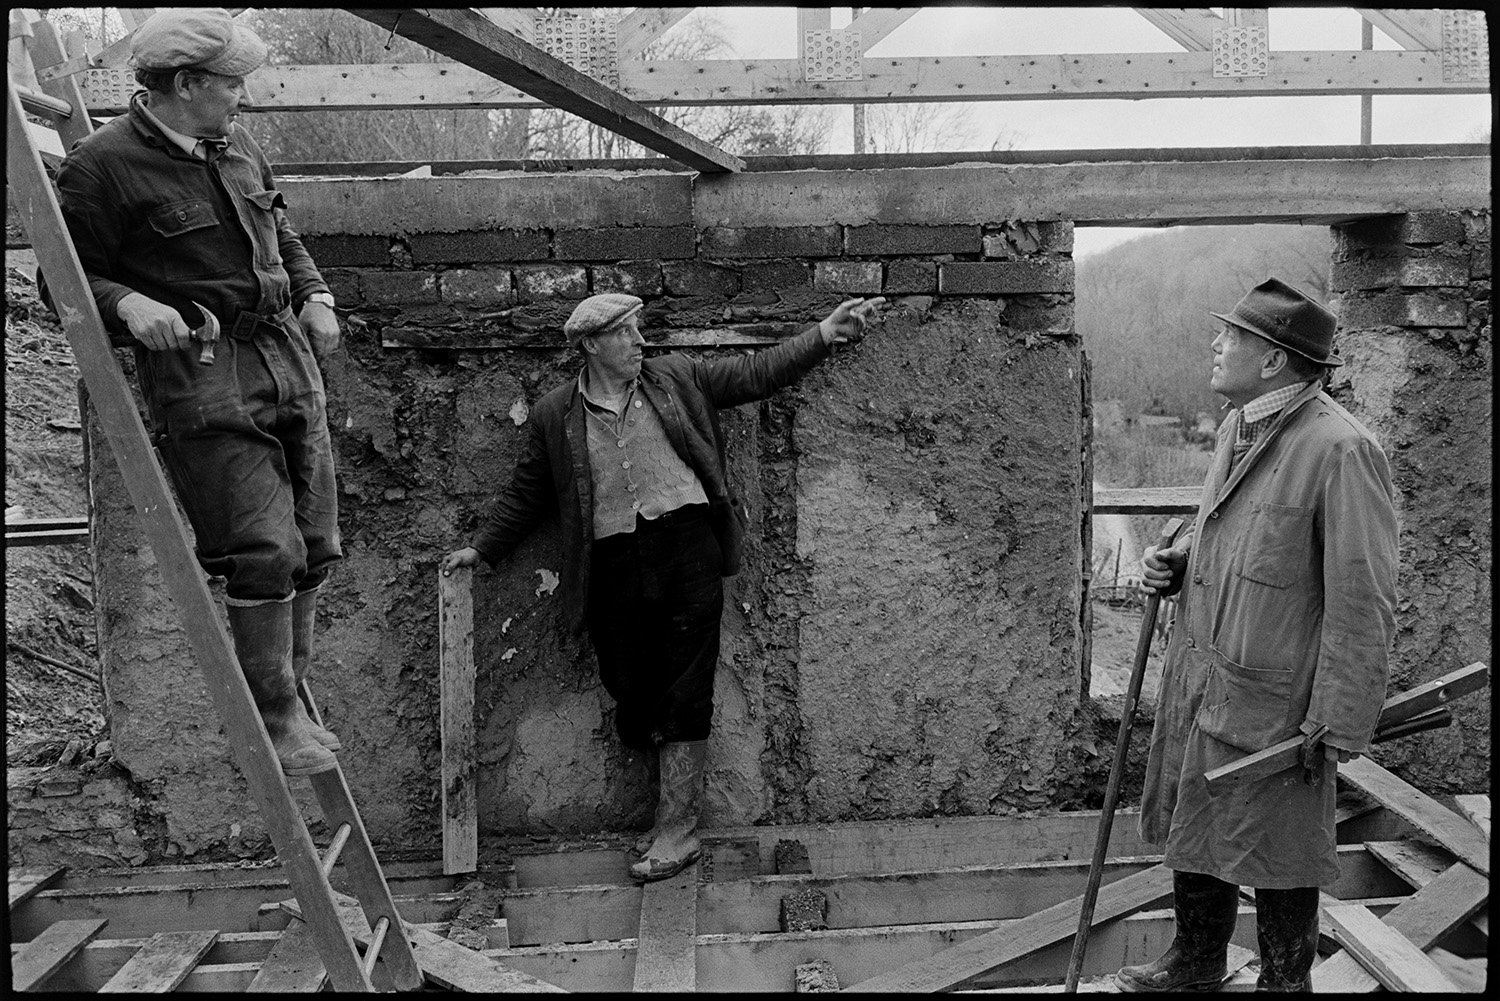 Builder renovating cottage with new roof.
[Builders renovating a cottage at Millhams, Dolton. Cob walls, concrete lintels, wooden rafters and joists are shown. One man is pointing at the roof, another builder is standing on a ladder and holding a hammer, while the third man is carrying a spirit level and hammer.]